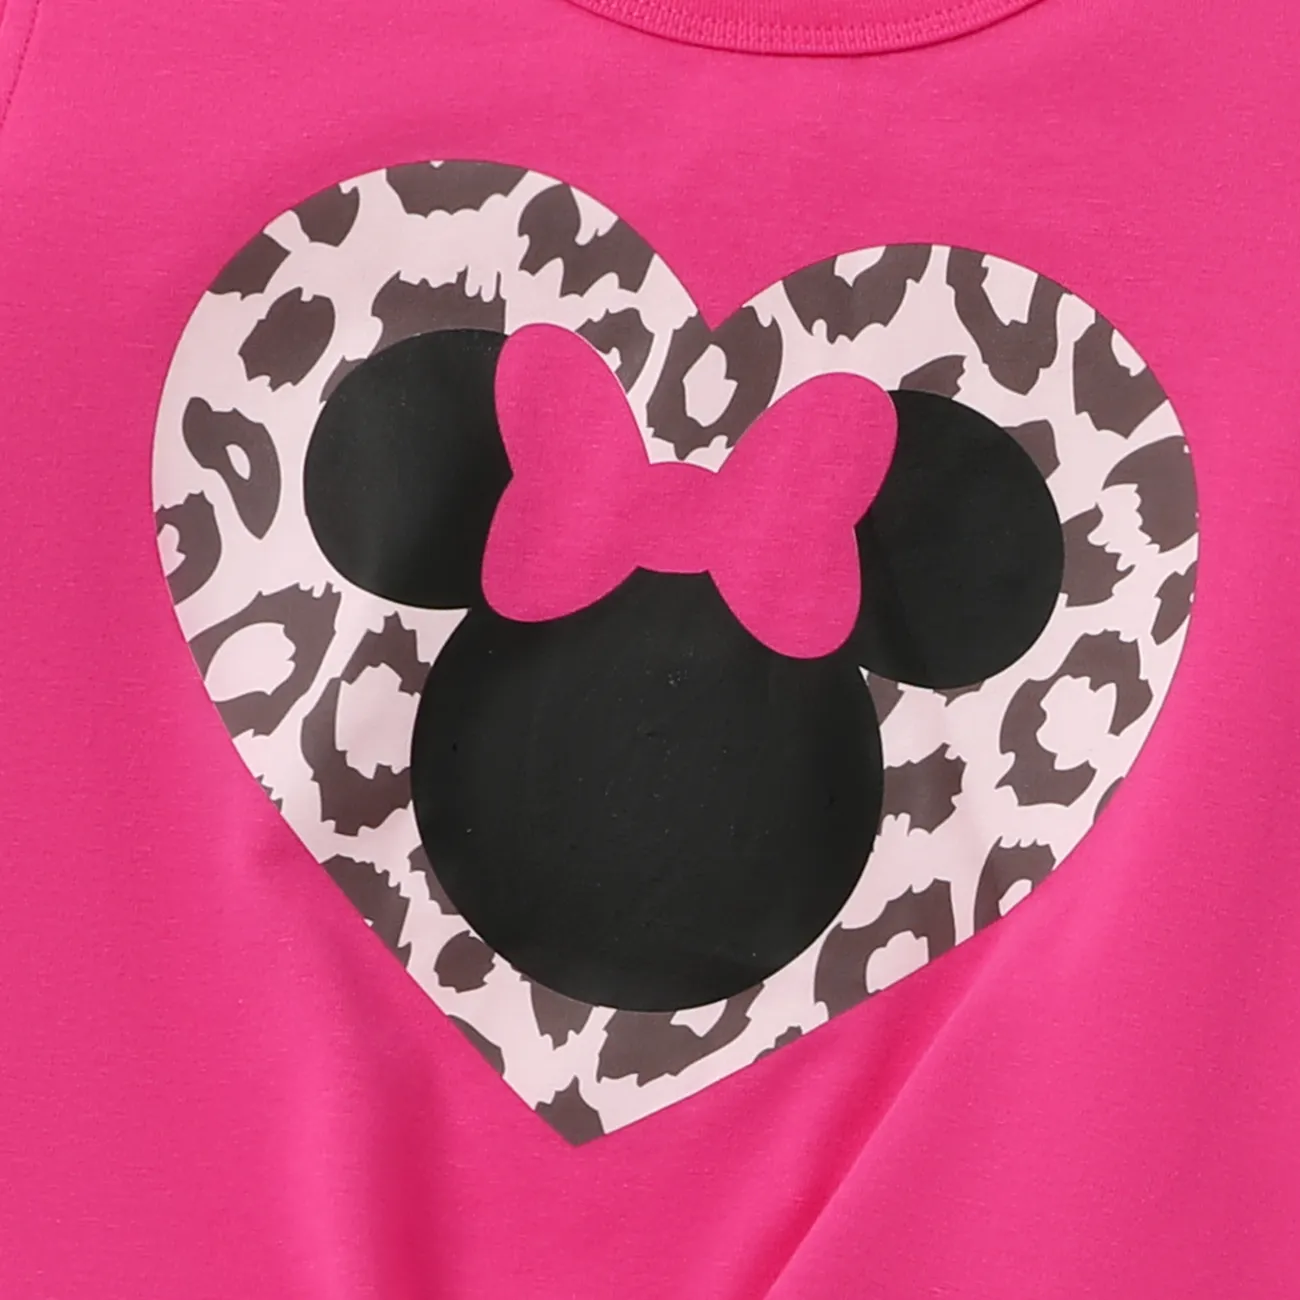 Disney Mickey and Friends Toddler/Kid Girl 2pcs Naia™ Leopard Character Print Flutter-sleeve Tee and Pants Set  PINK-1 big image 1